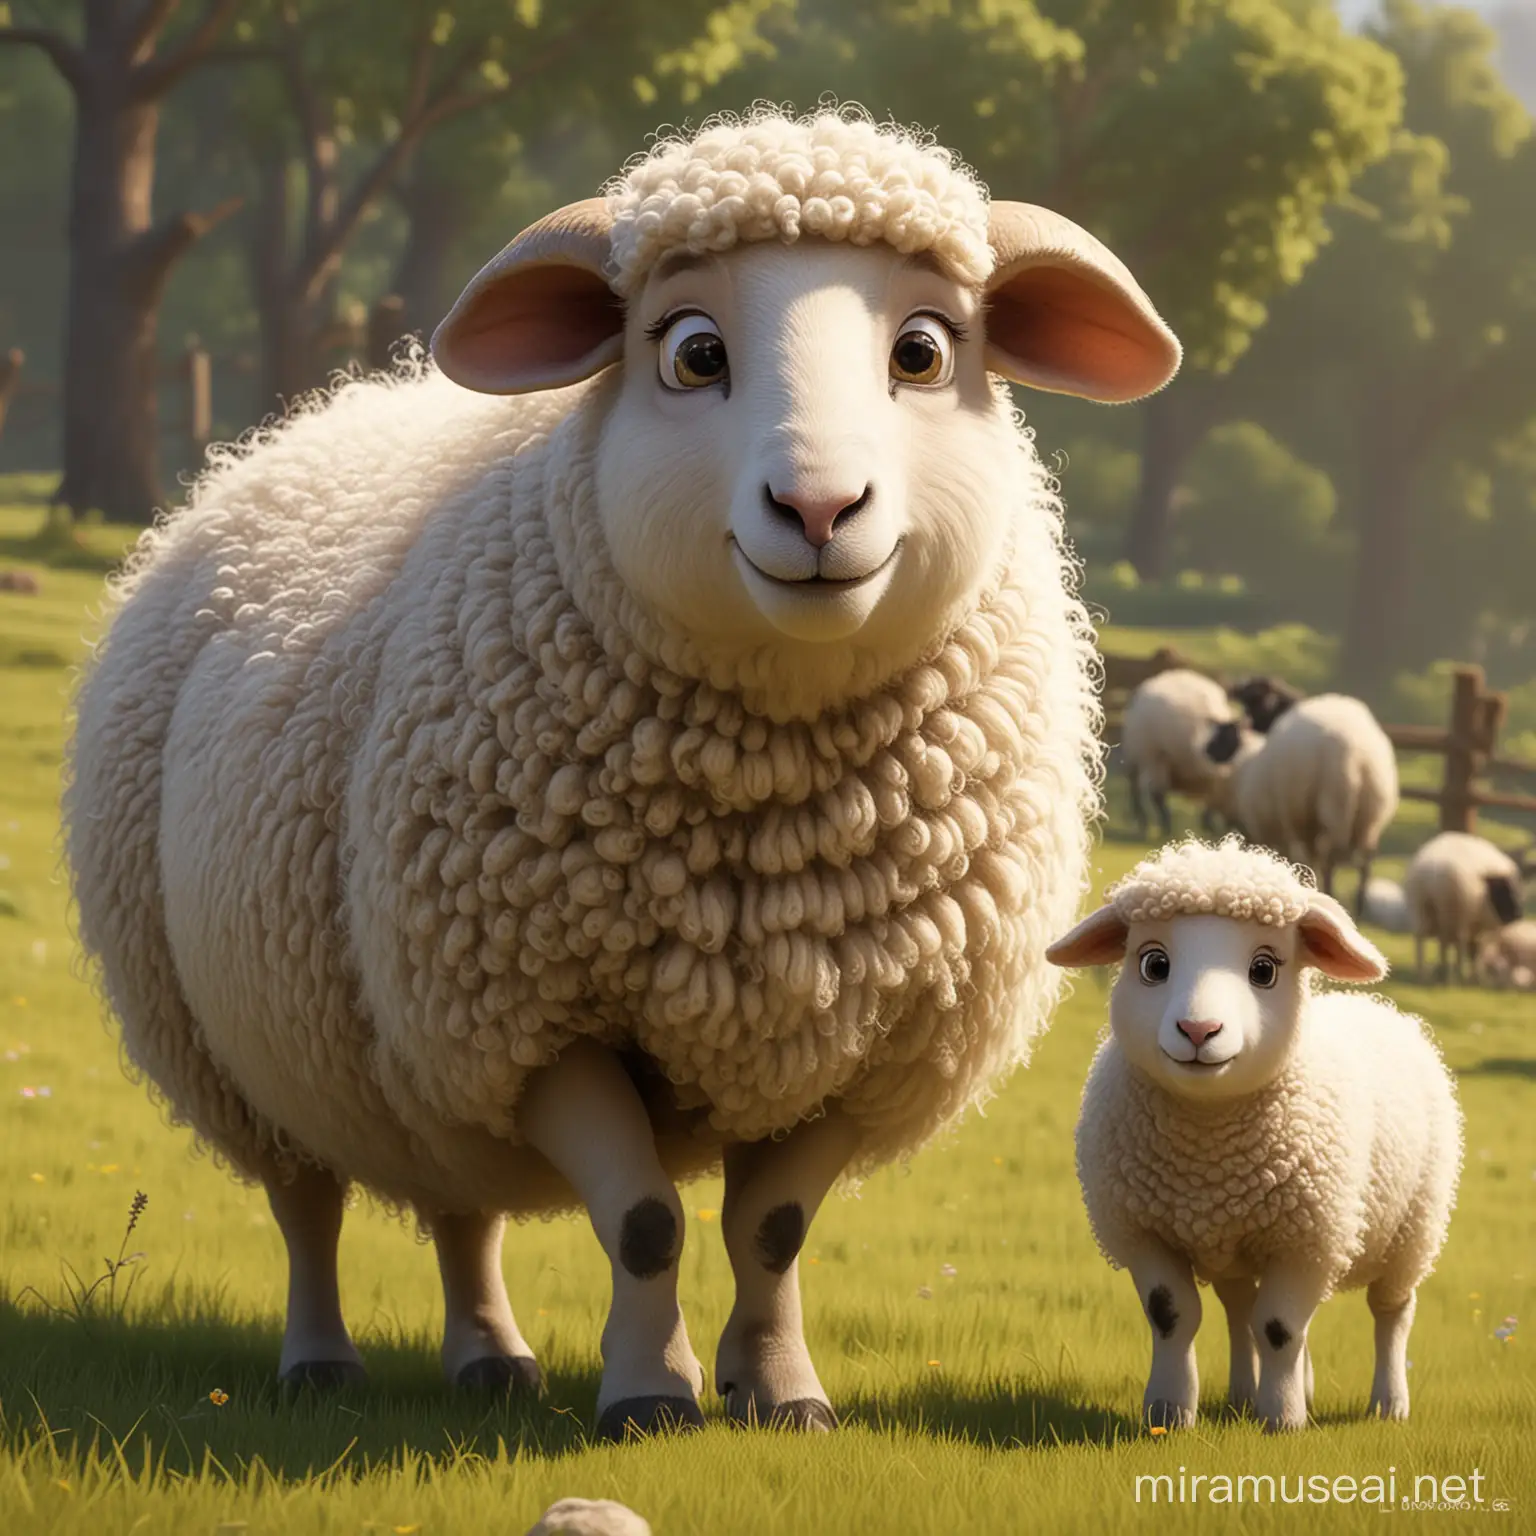 Adorable Mother Sheep in Disney Pixar Style